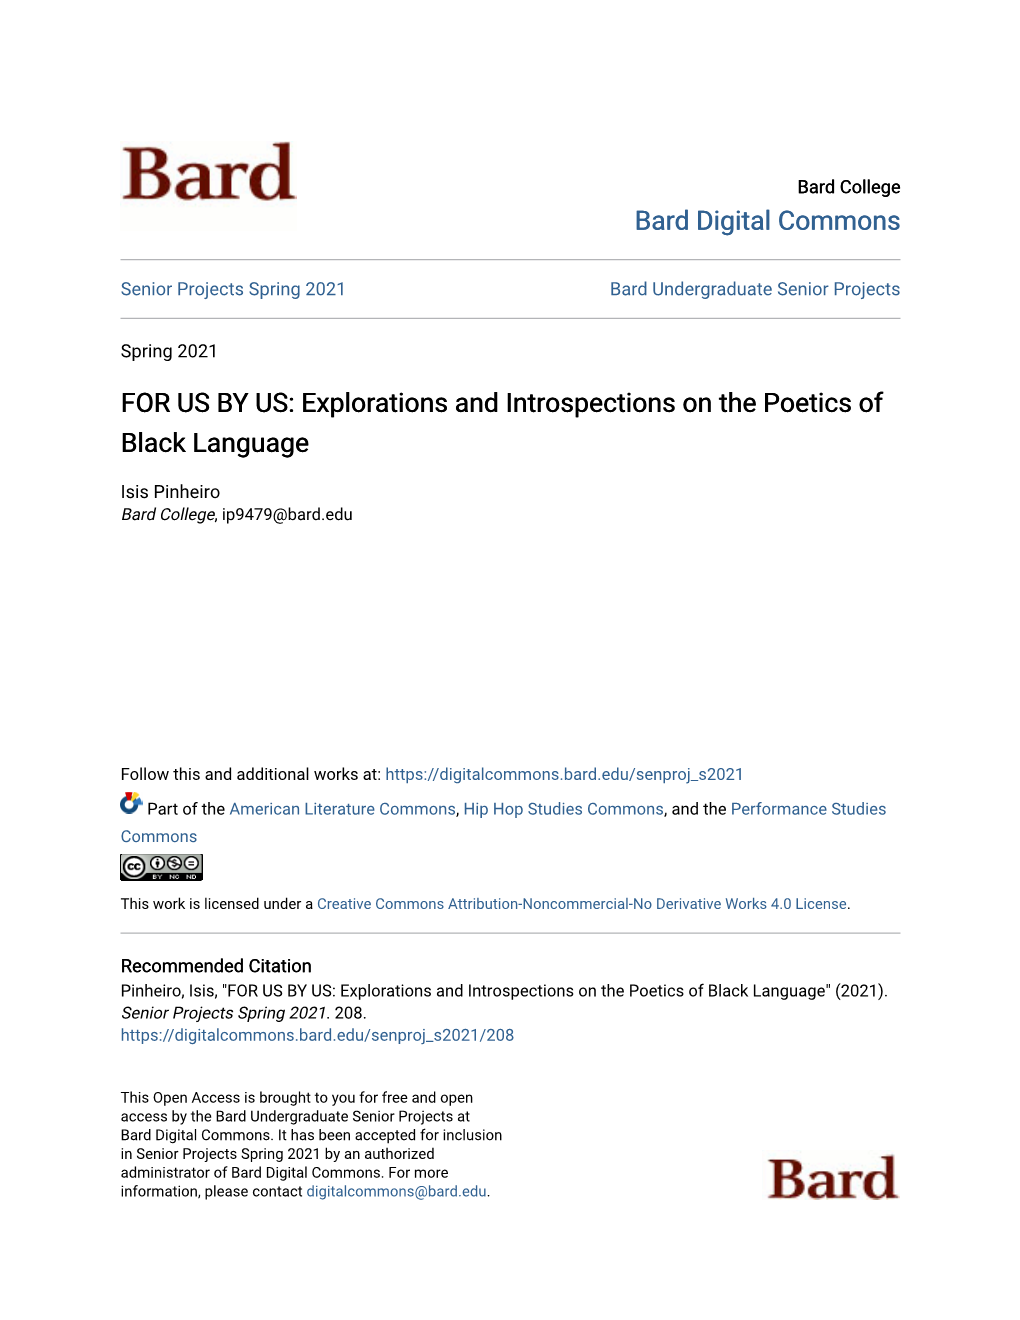 FOR US by US: Explorations and Introspections on the Poetics of Black Language